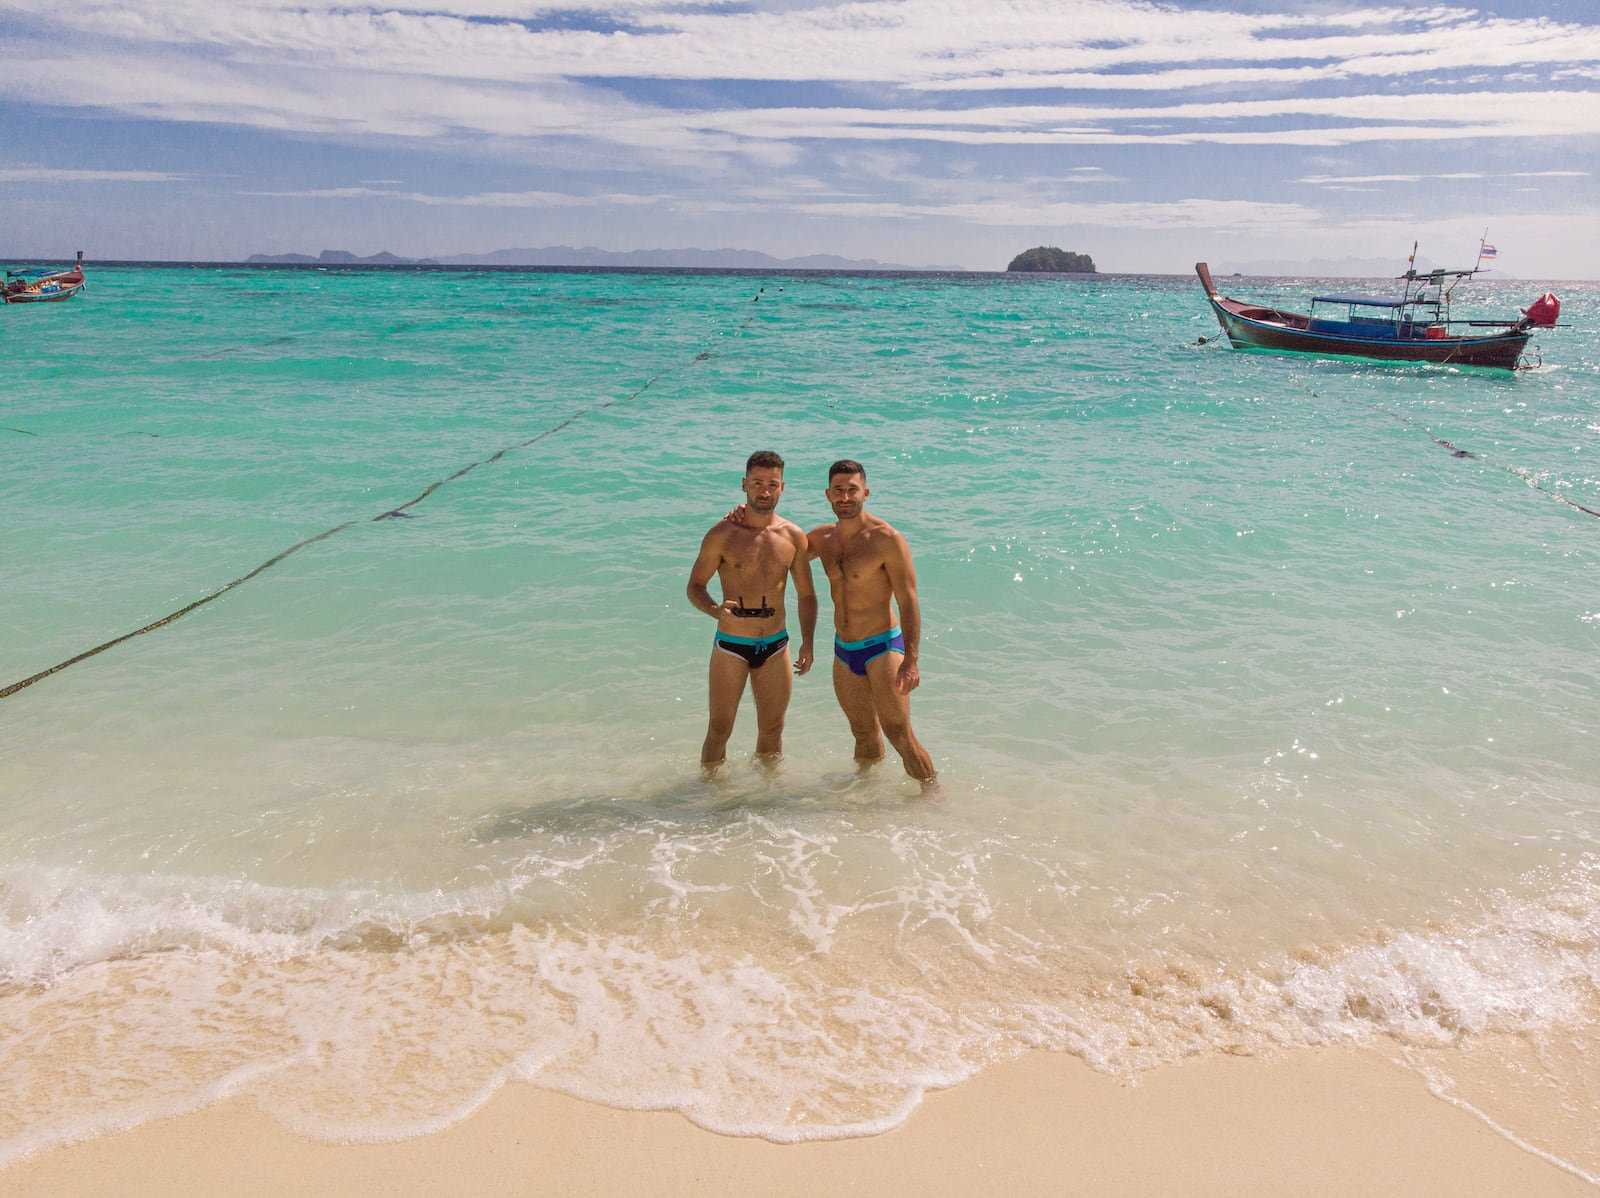 A gay couple in shorts standing in shallow waters with a boat behind them.